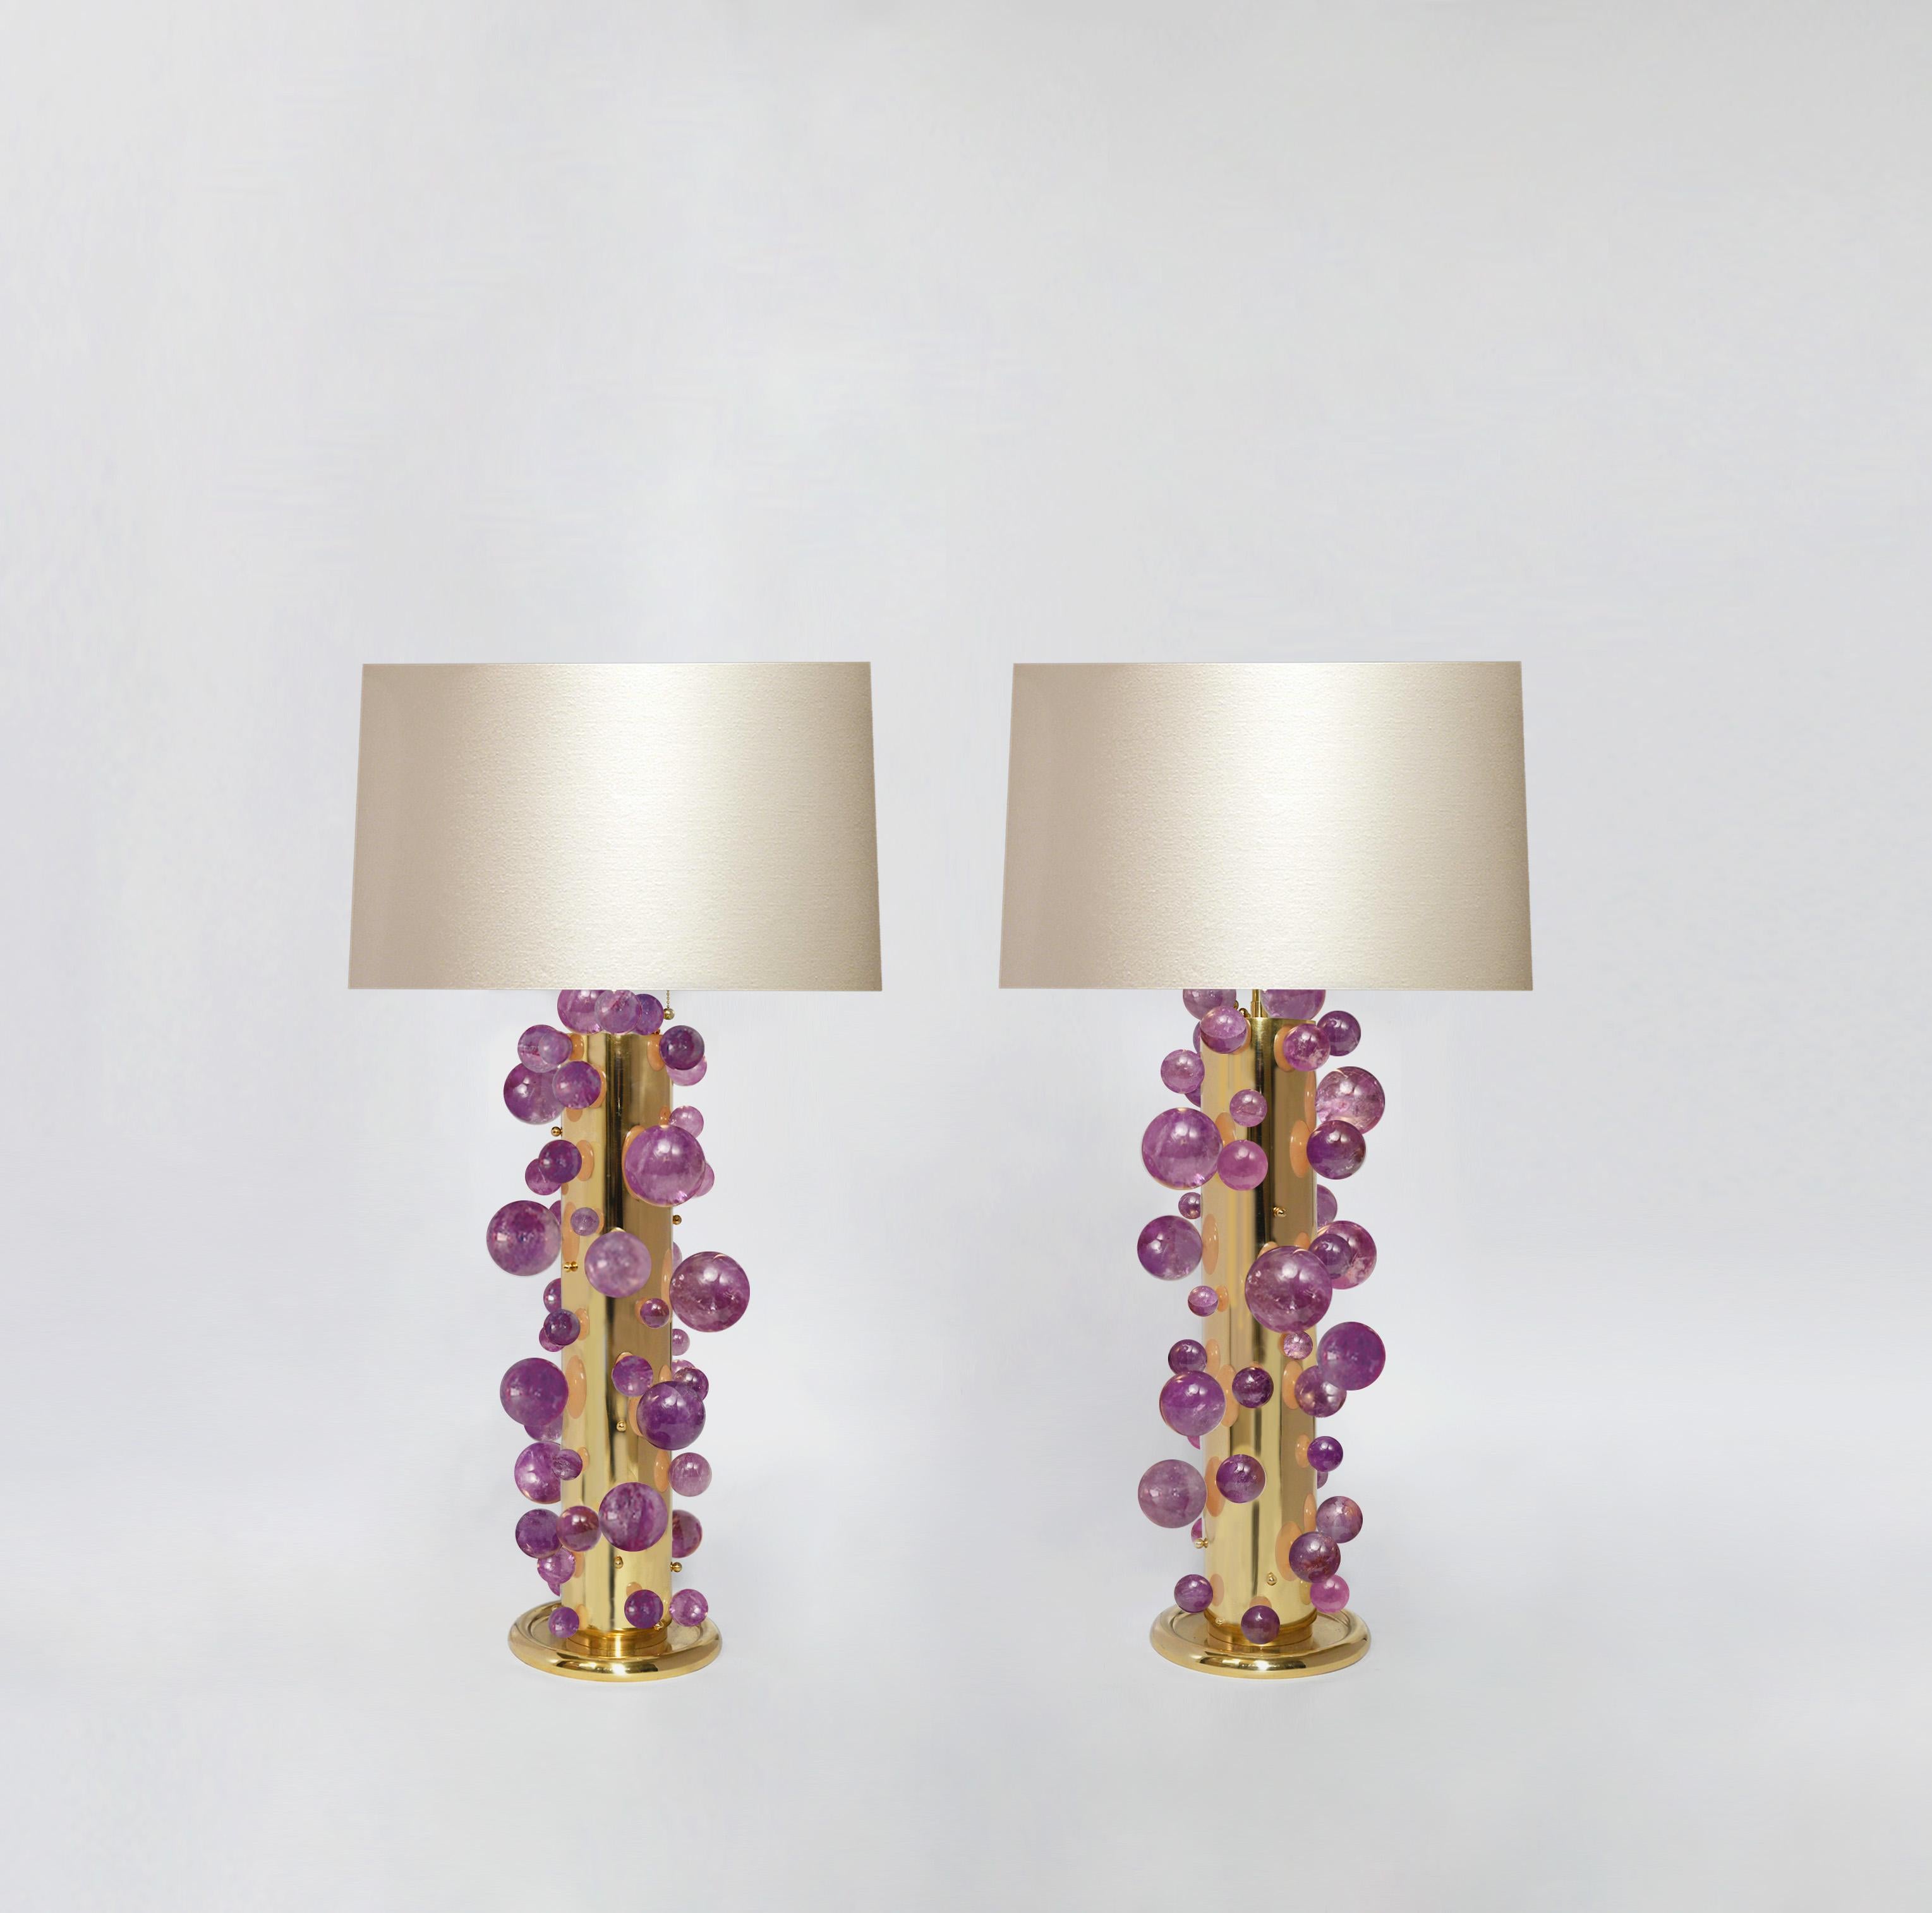 A tall pair of luxury amethyst rock crystal quartz bubble lamps with polished brass frames. Created by Phoenix Gallery, NYC.
Each lamp installed two sockets.
To the top of the rock crystal 25.75